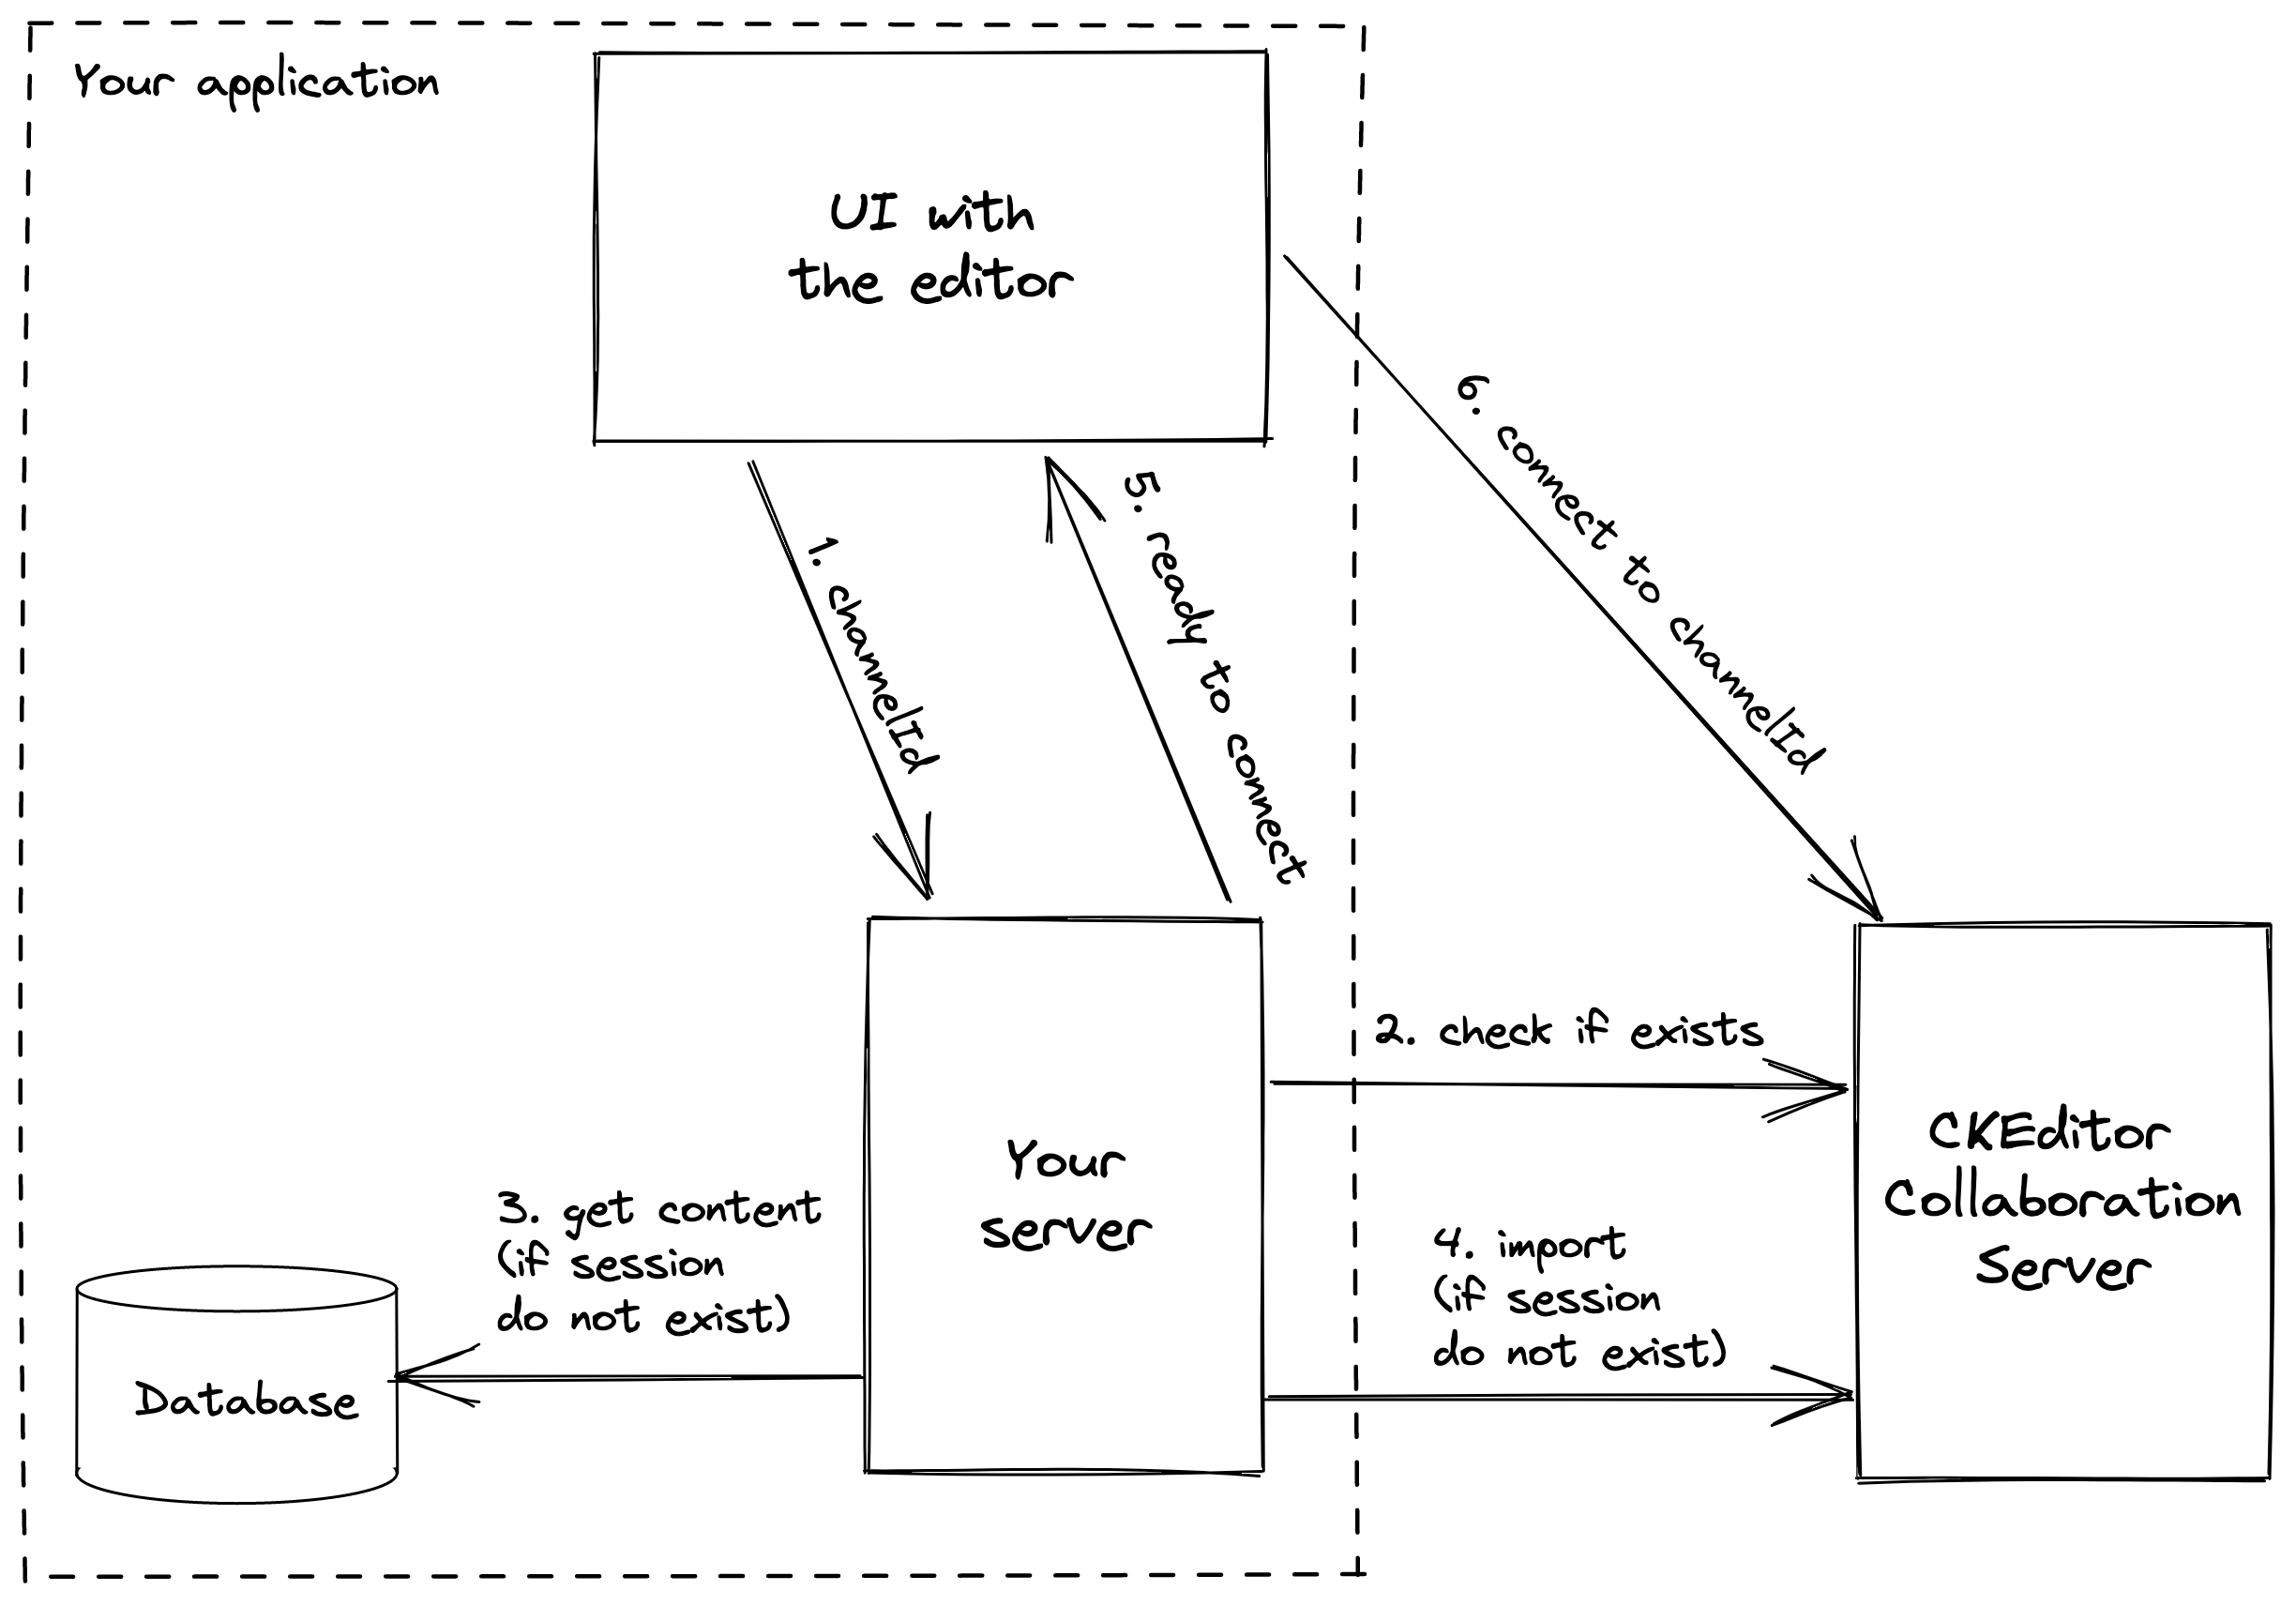 The workflow of initializing collaboration session with Import REST API.